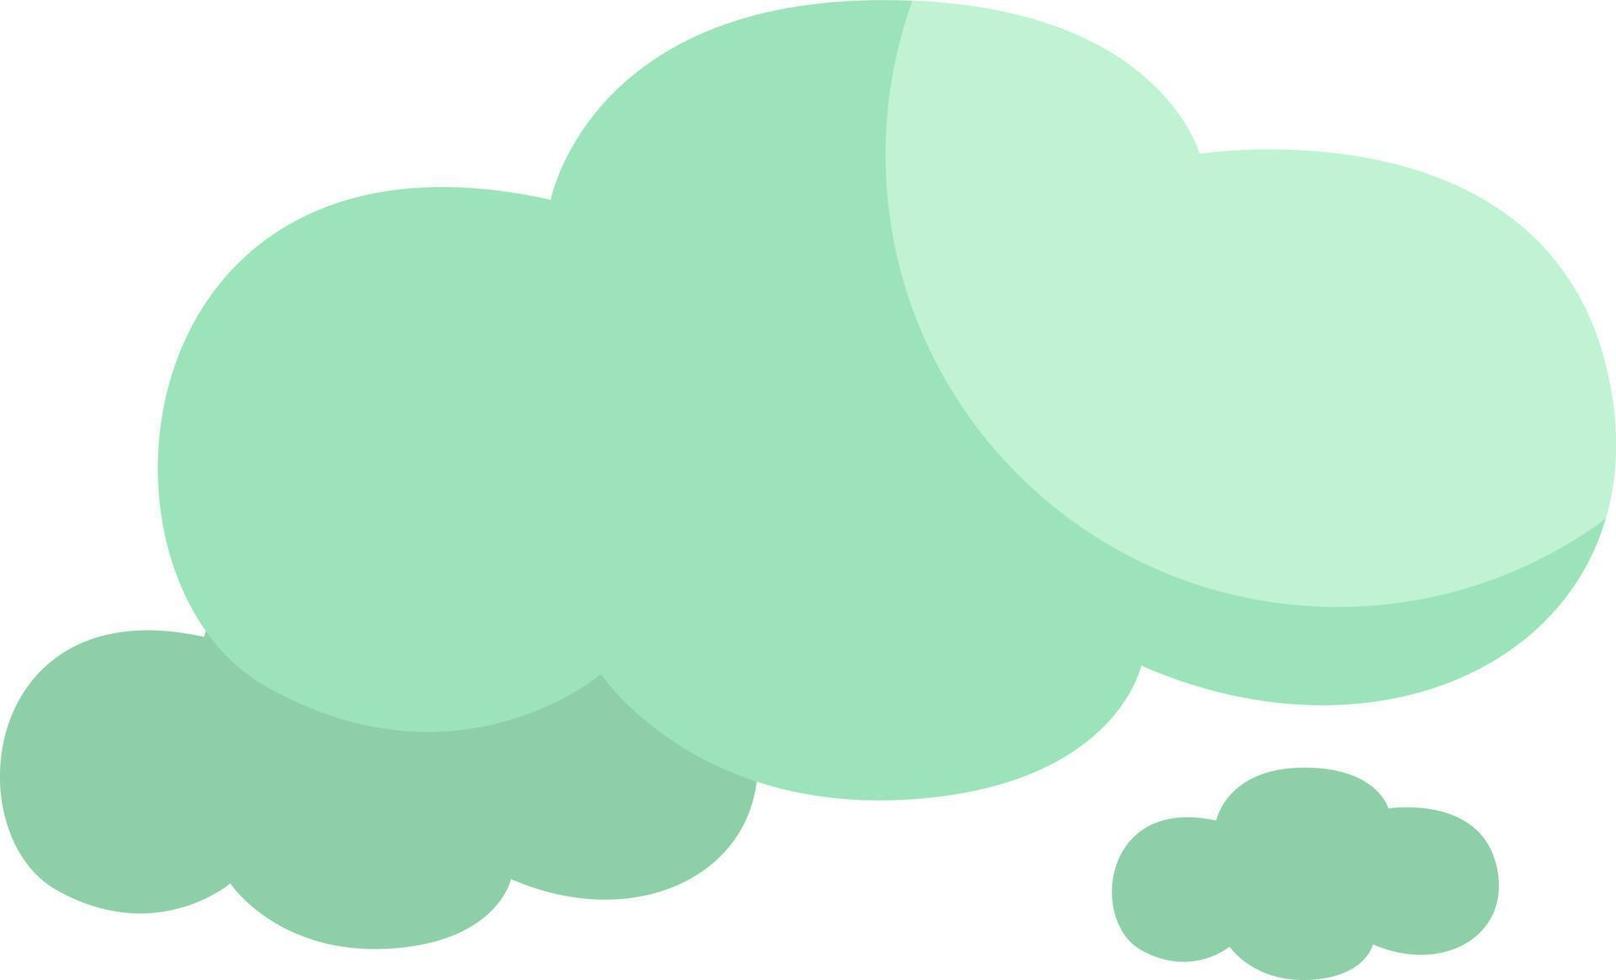 Spring clouds, illustration, vector on a white background.